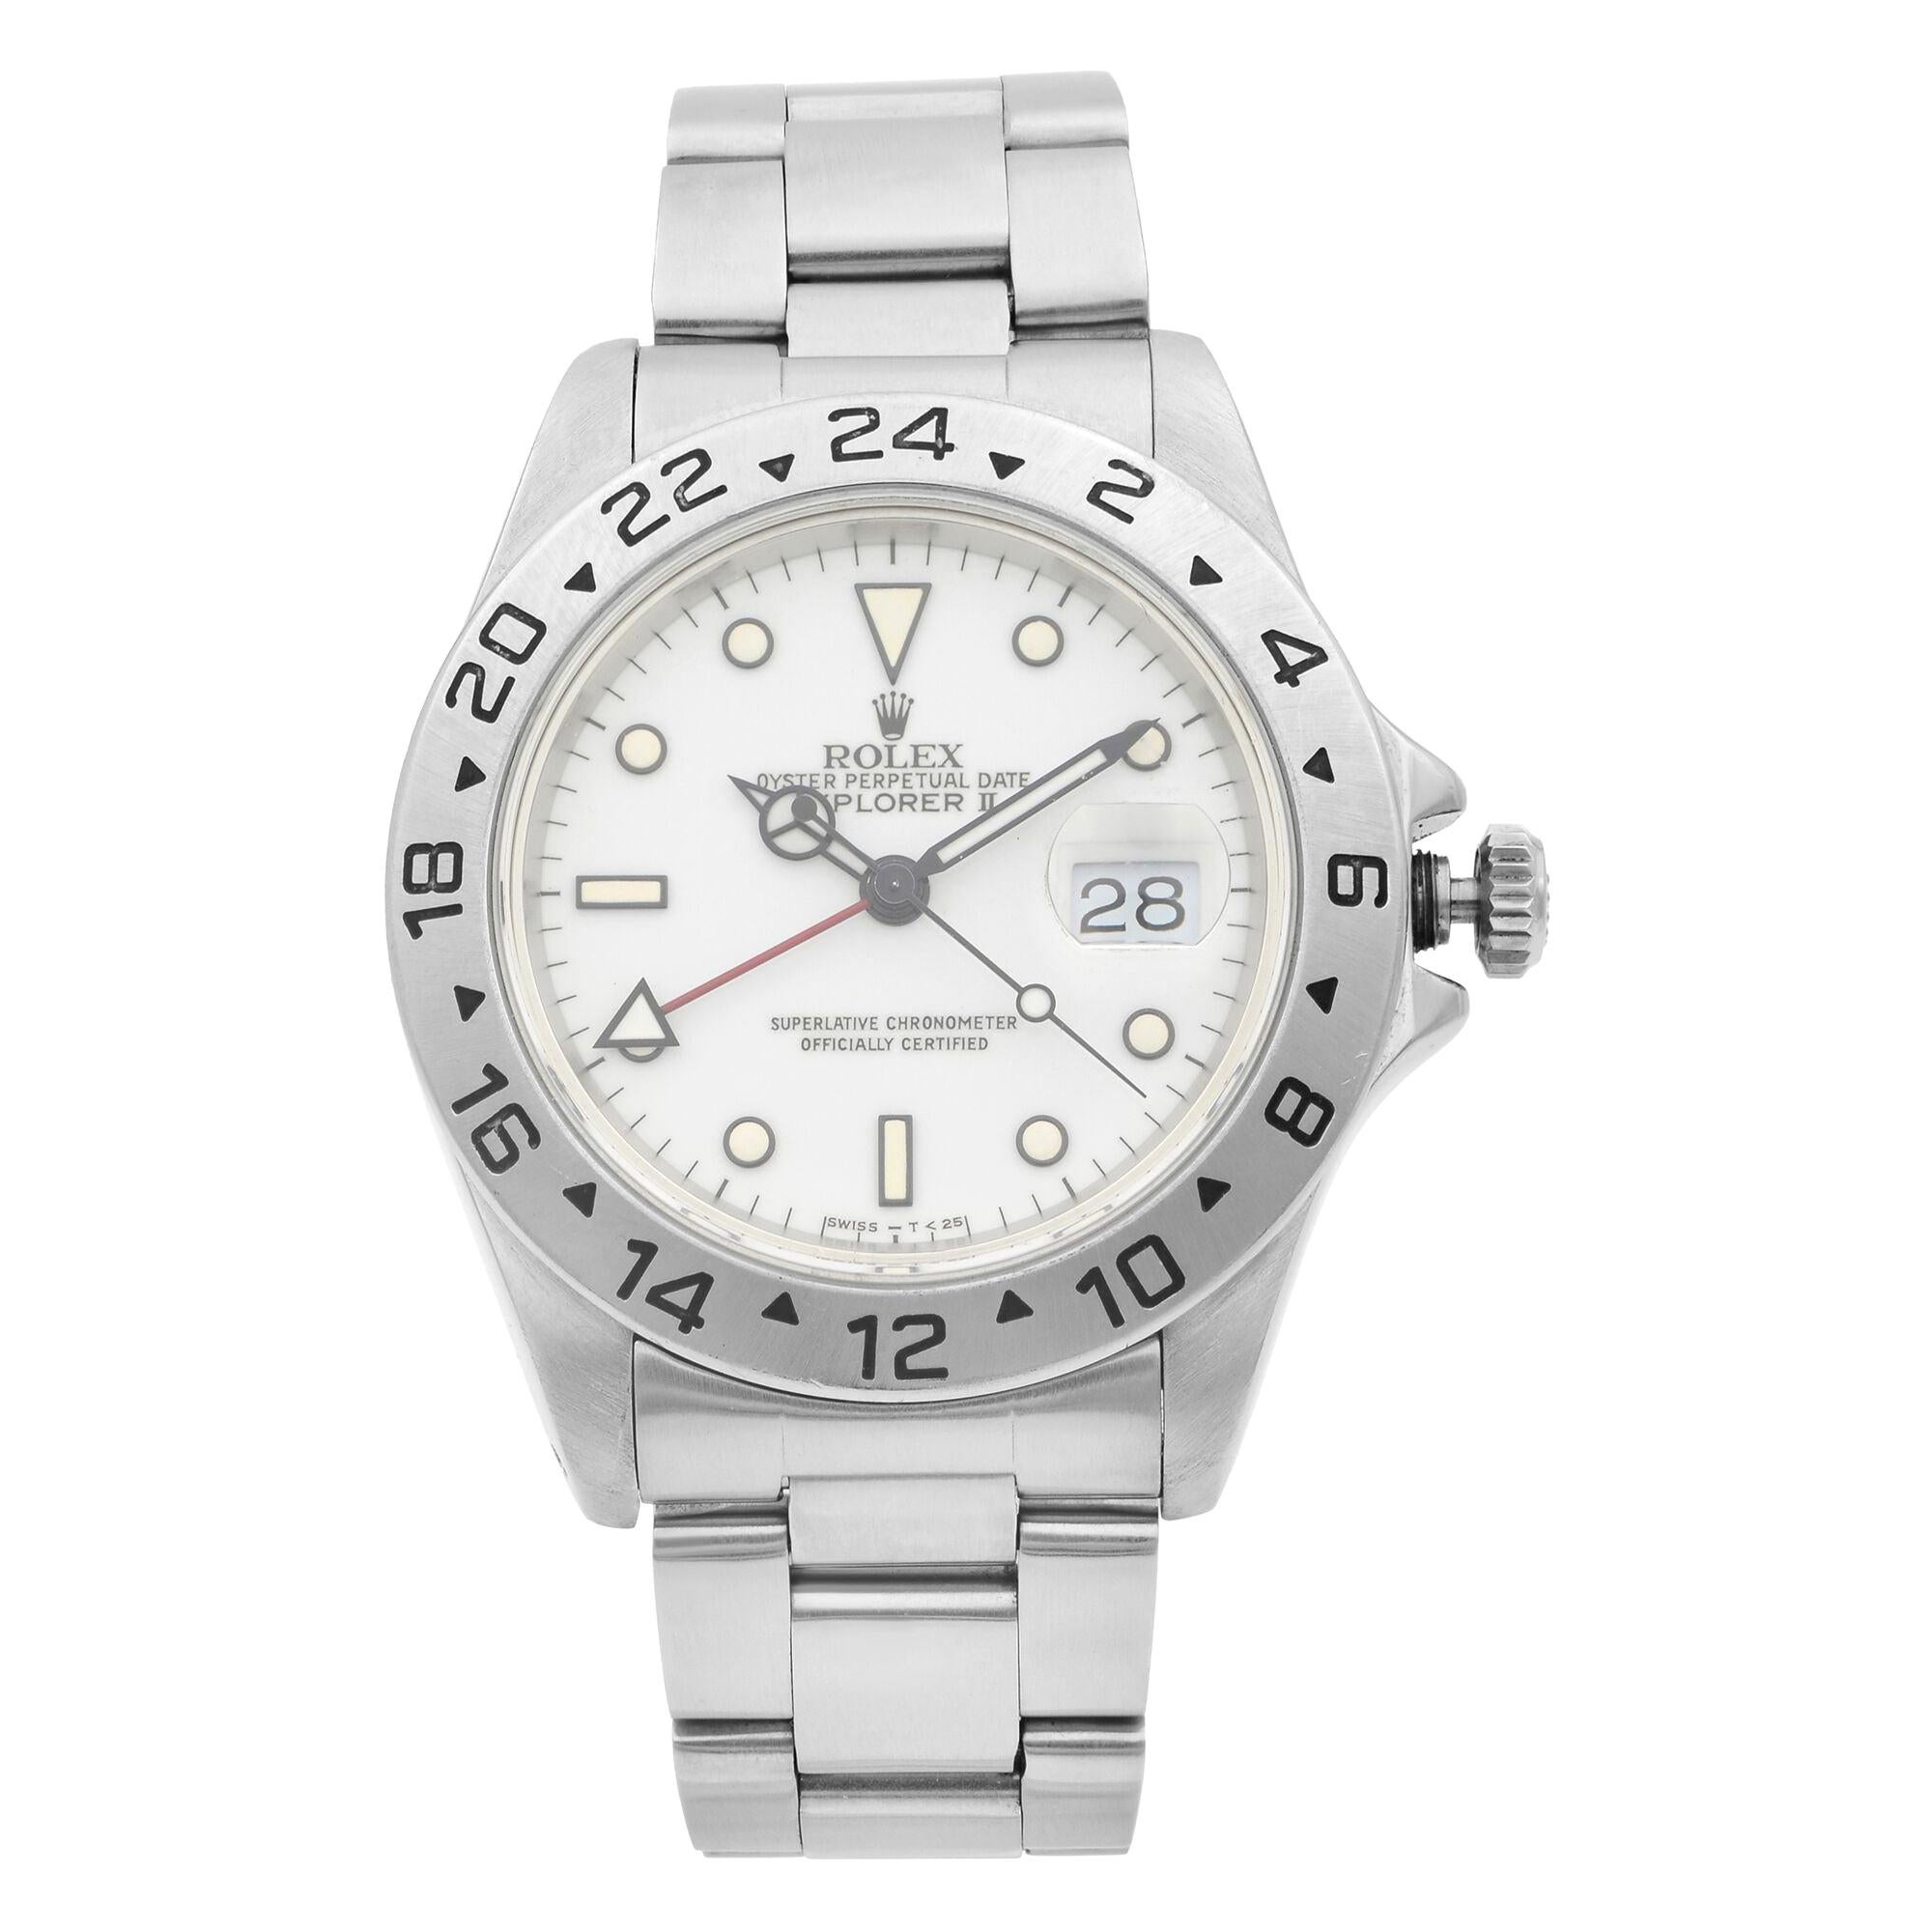 Rolex Explorer II White Dial Red Hand Automatic Men's Watch 16570